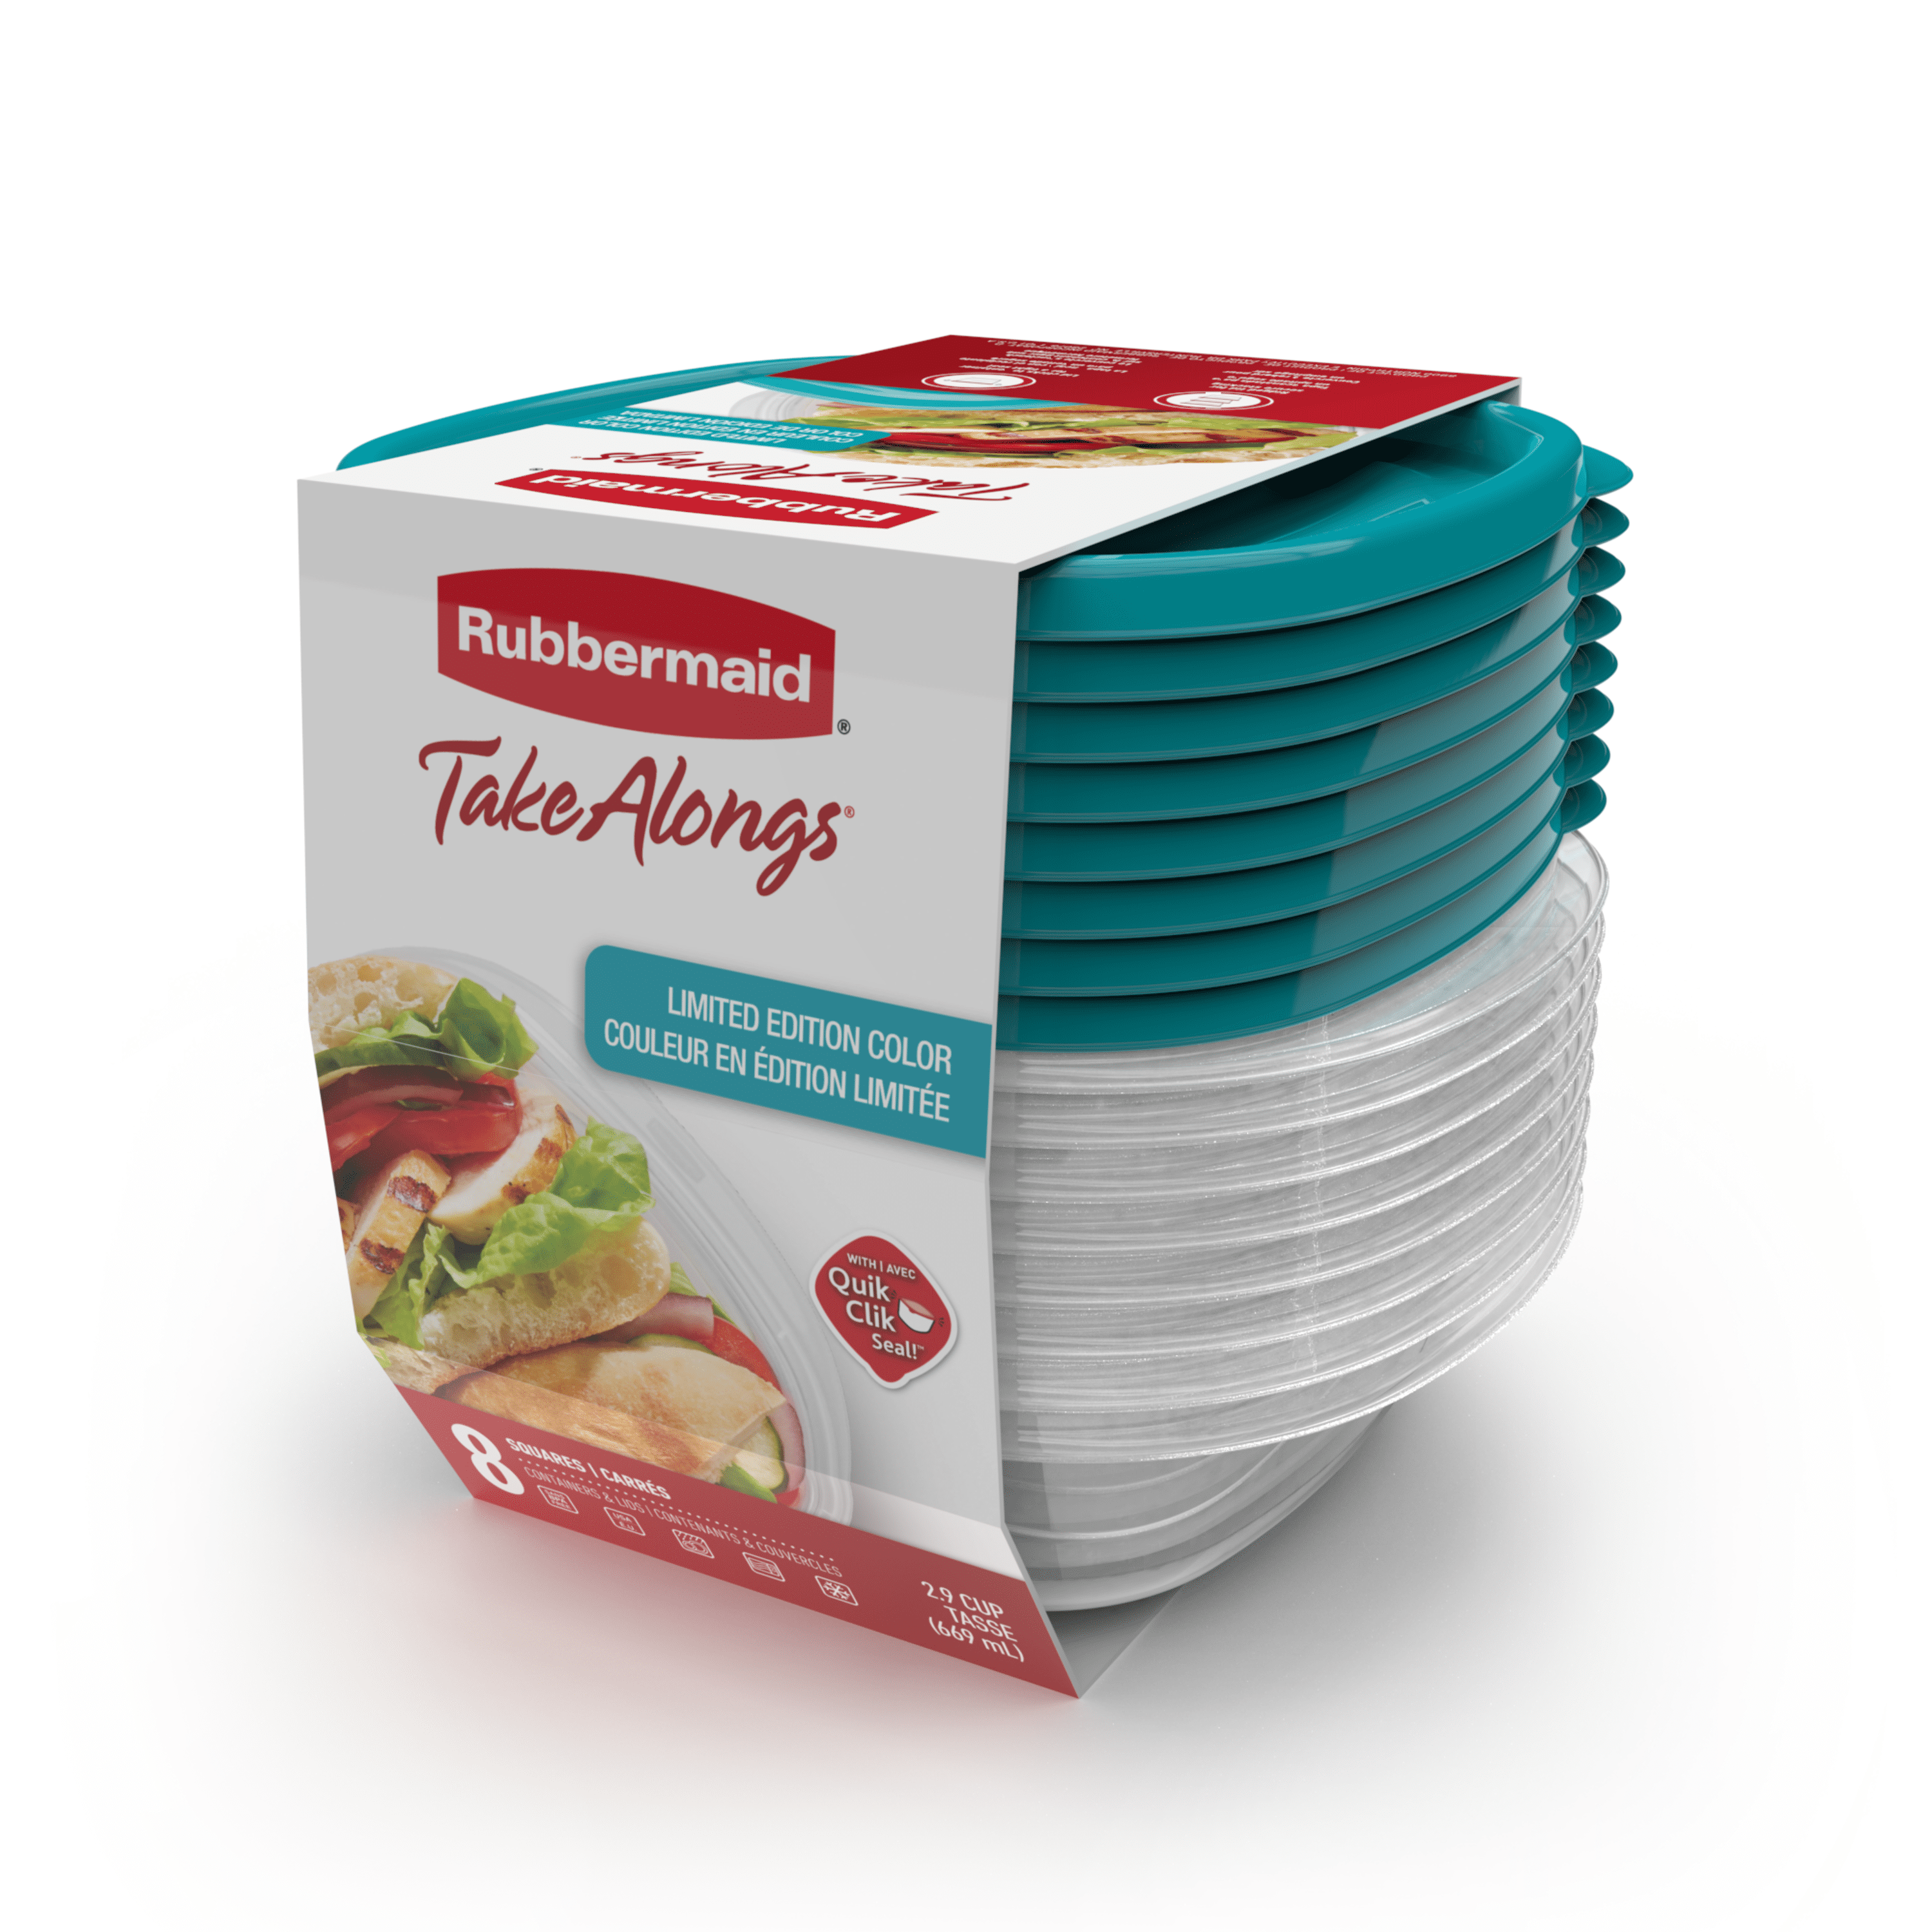 Rubbermaid TakeAlongs Containers are ONLY $0.50 at Kroger!! - Kroger Krazy